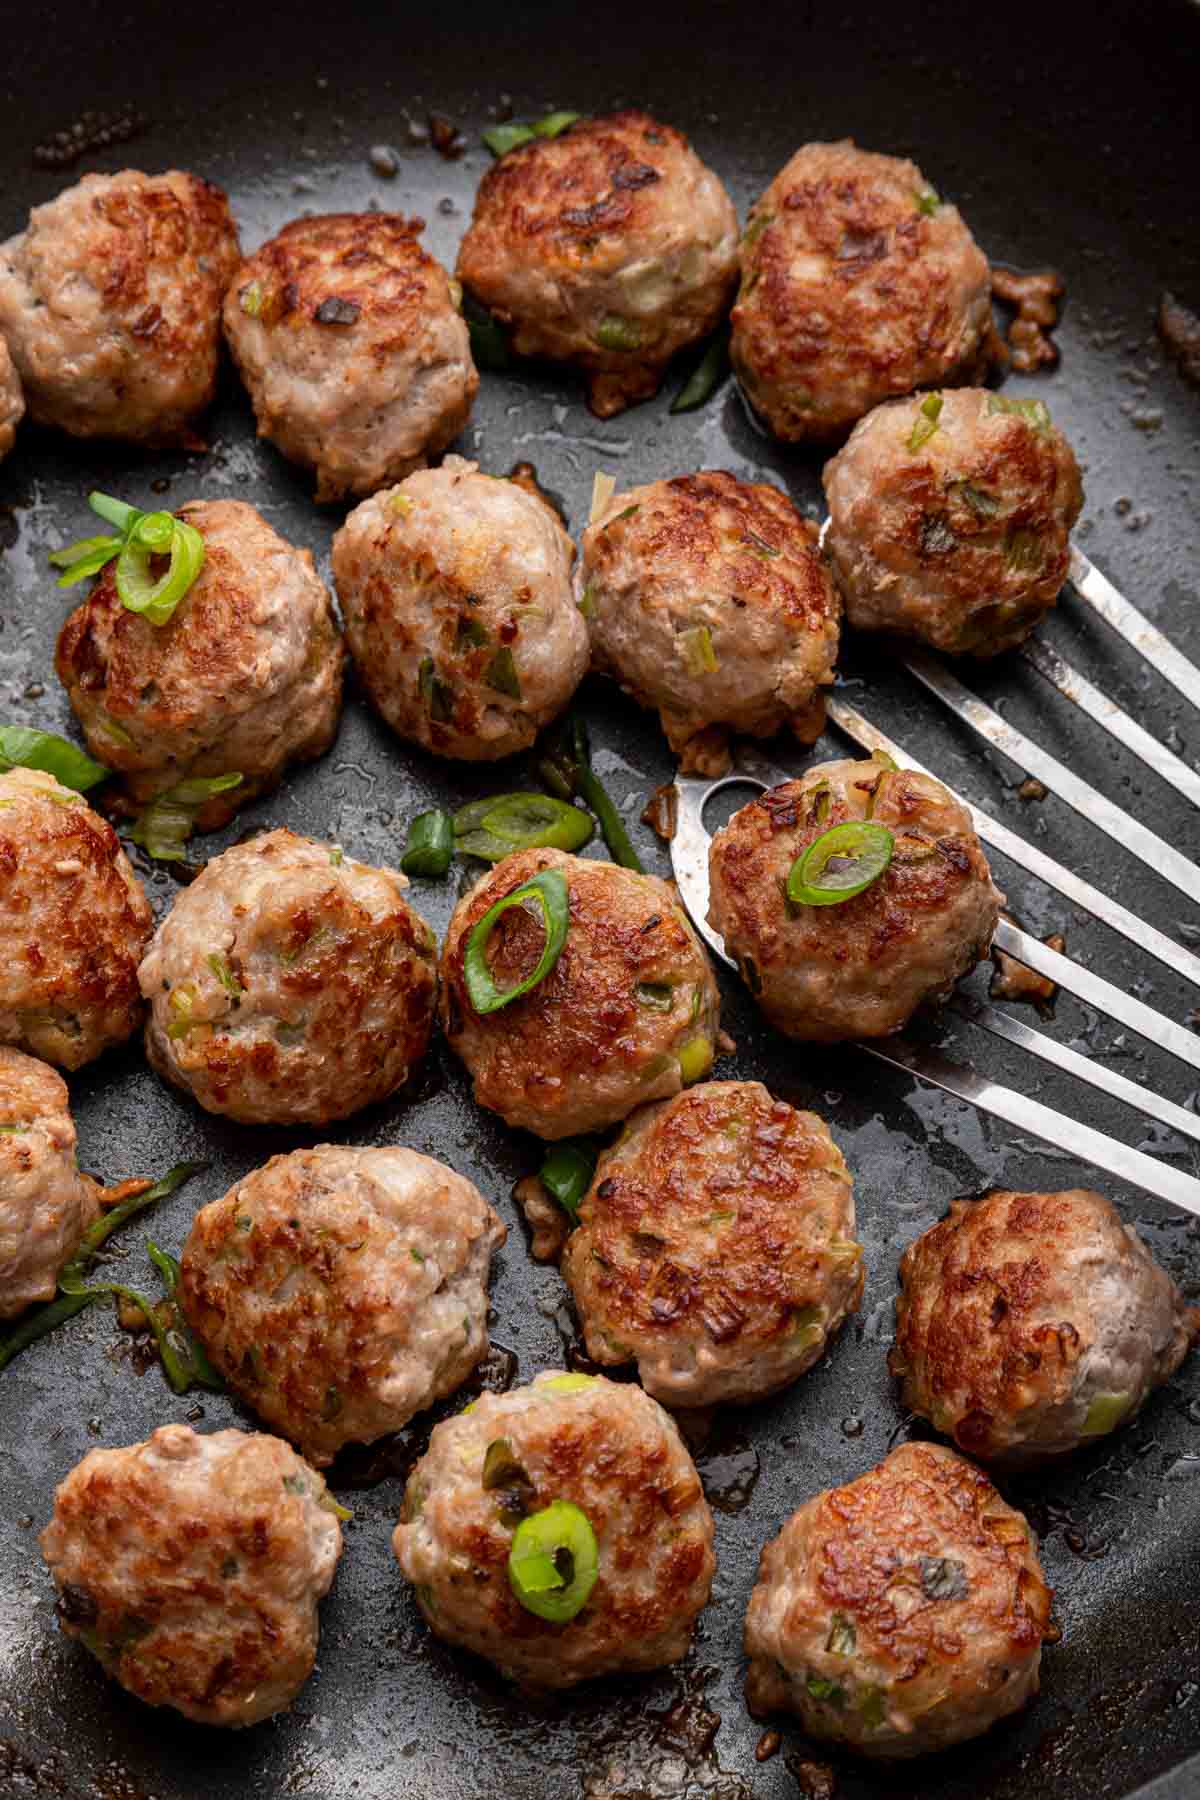 Perfectly round pork meatballs in a black cast iron skillet.